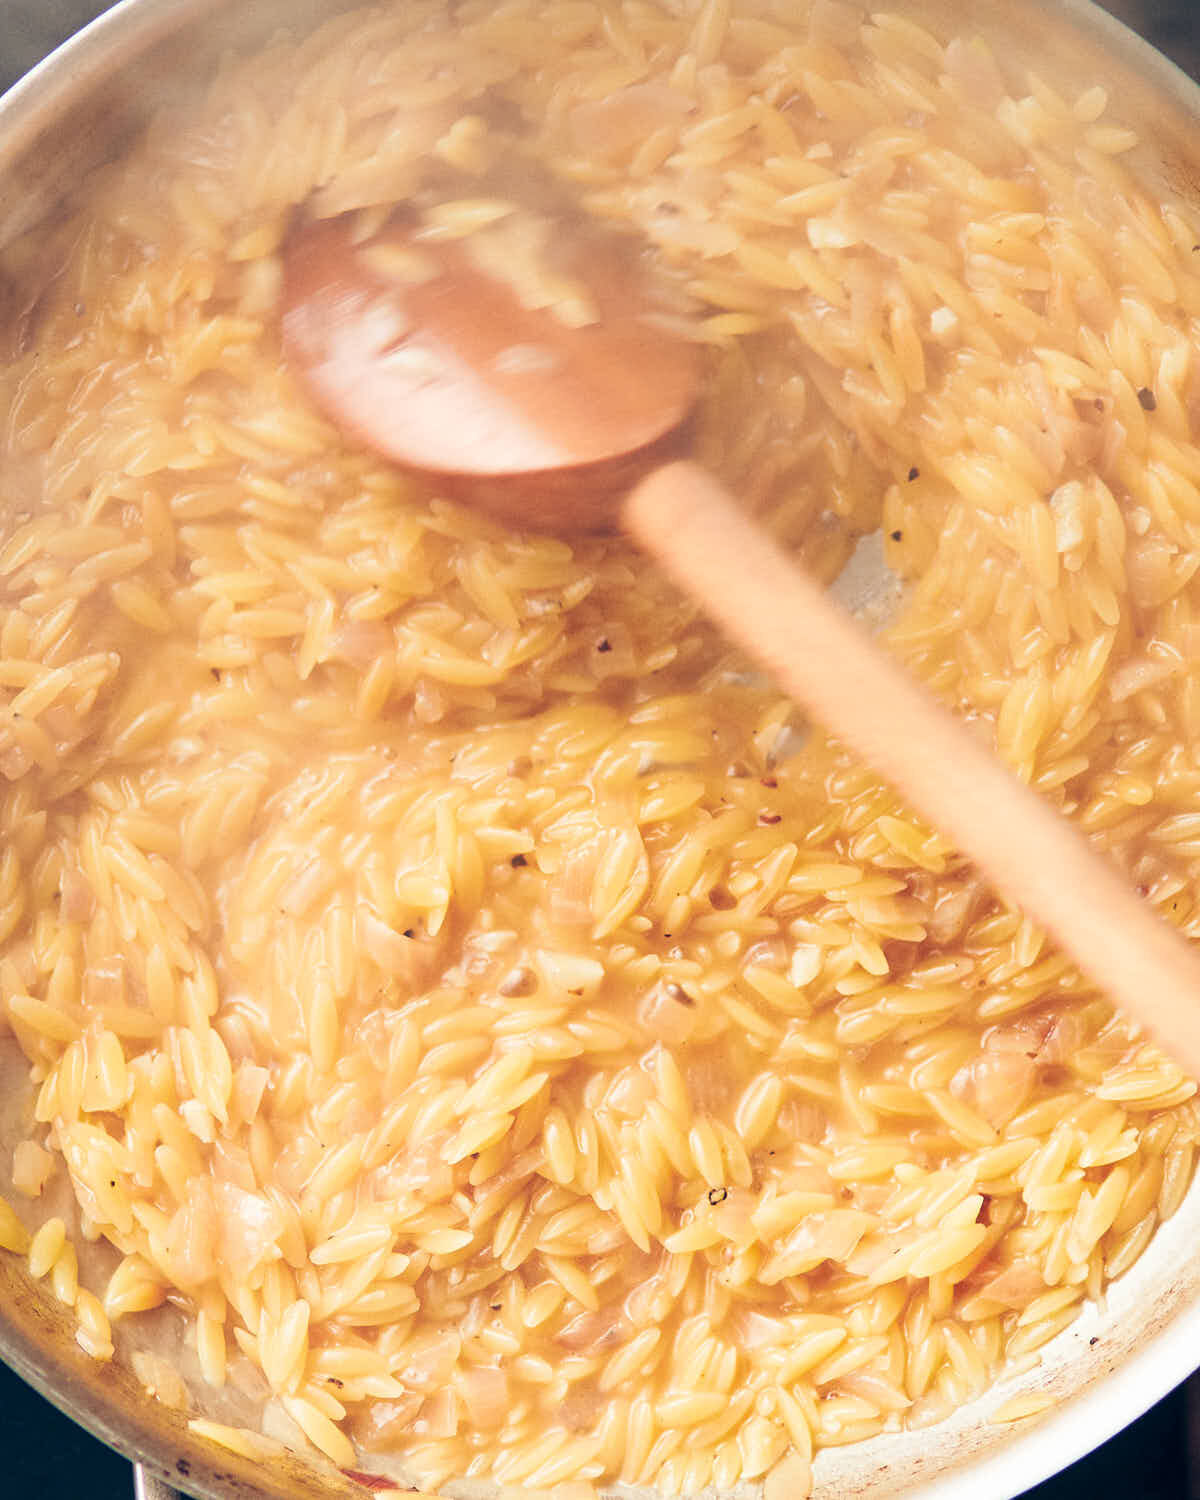 Partially cooked orzo being stirred with a wooden spoon.